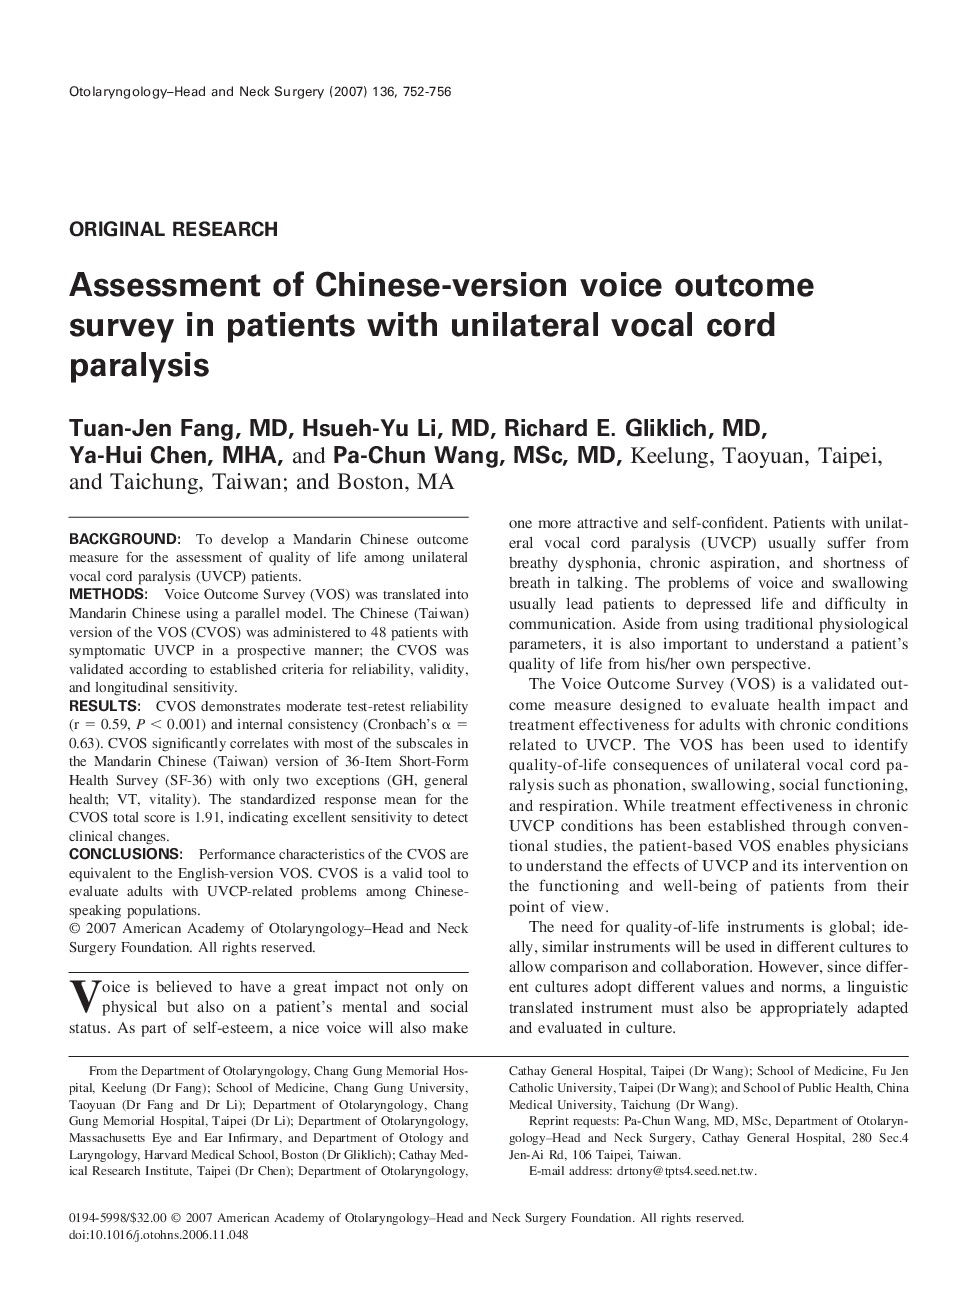 Assessment of Chinese-version voice outcome survey in patients with unilateral vocal cord paralysis